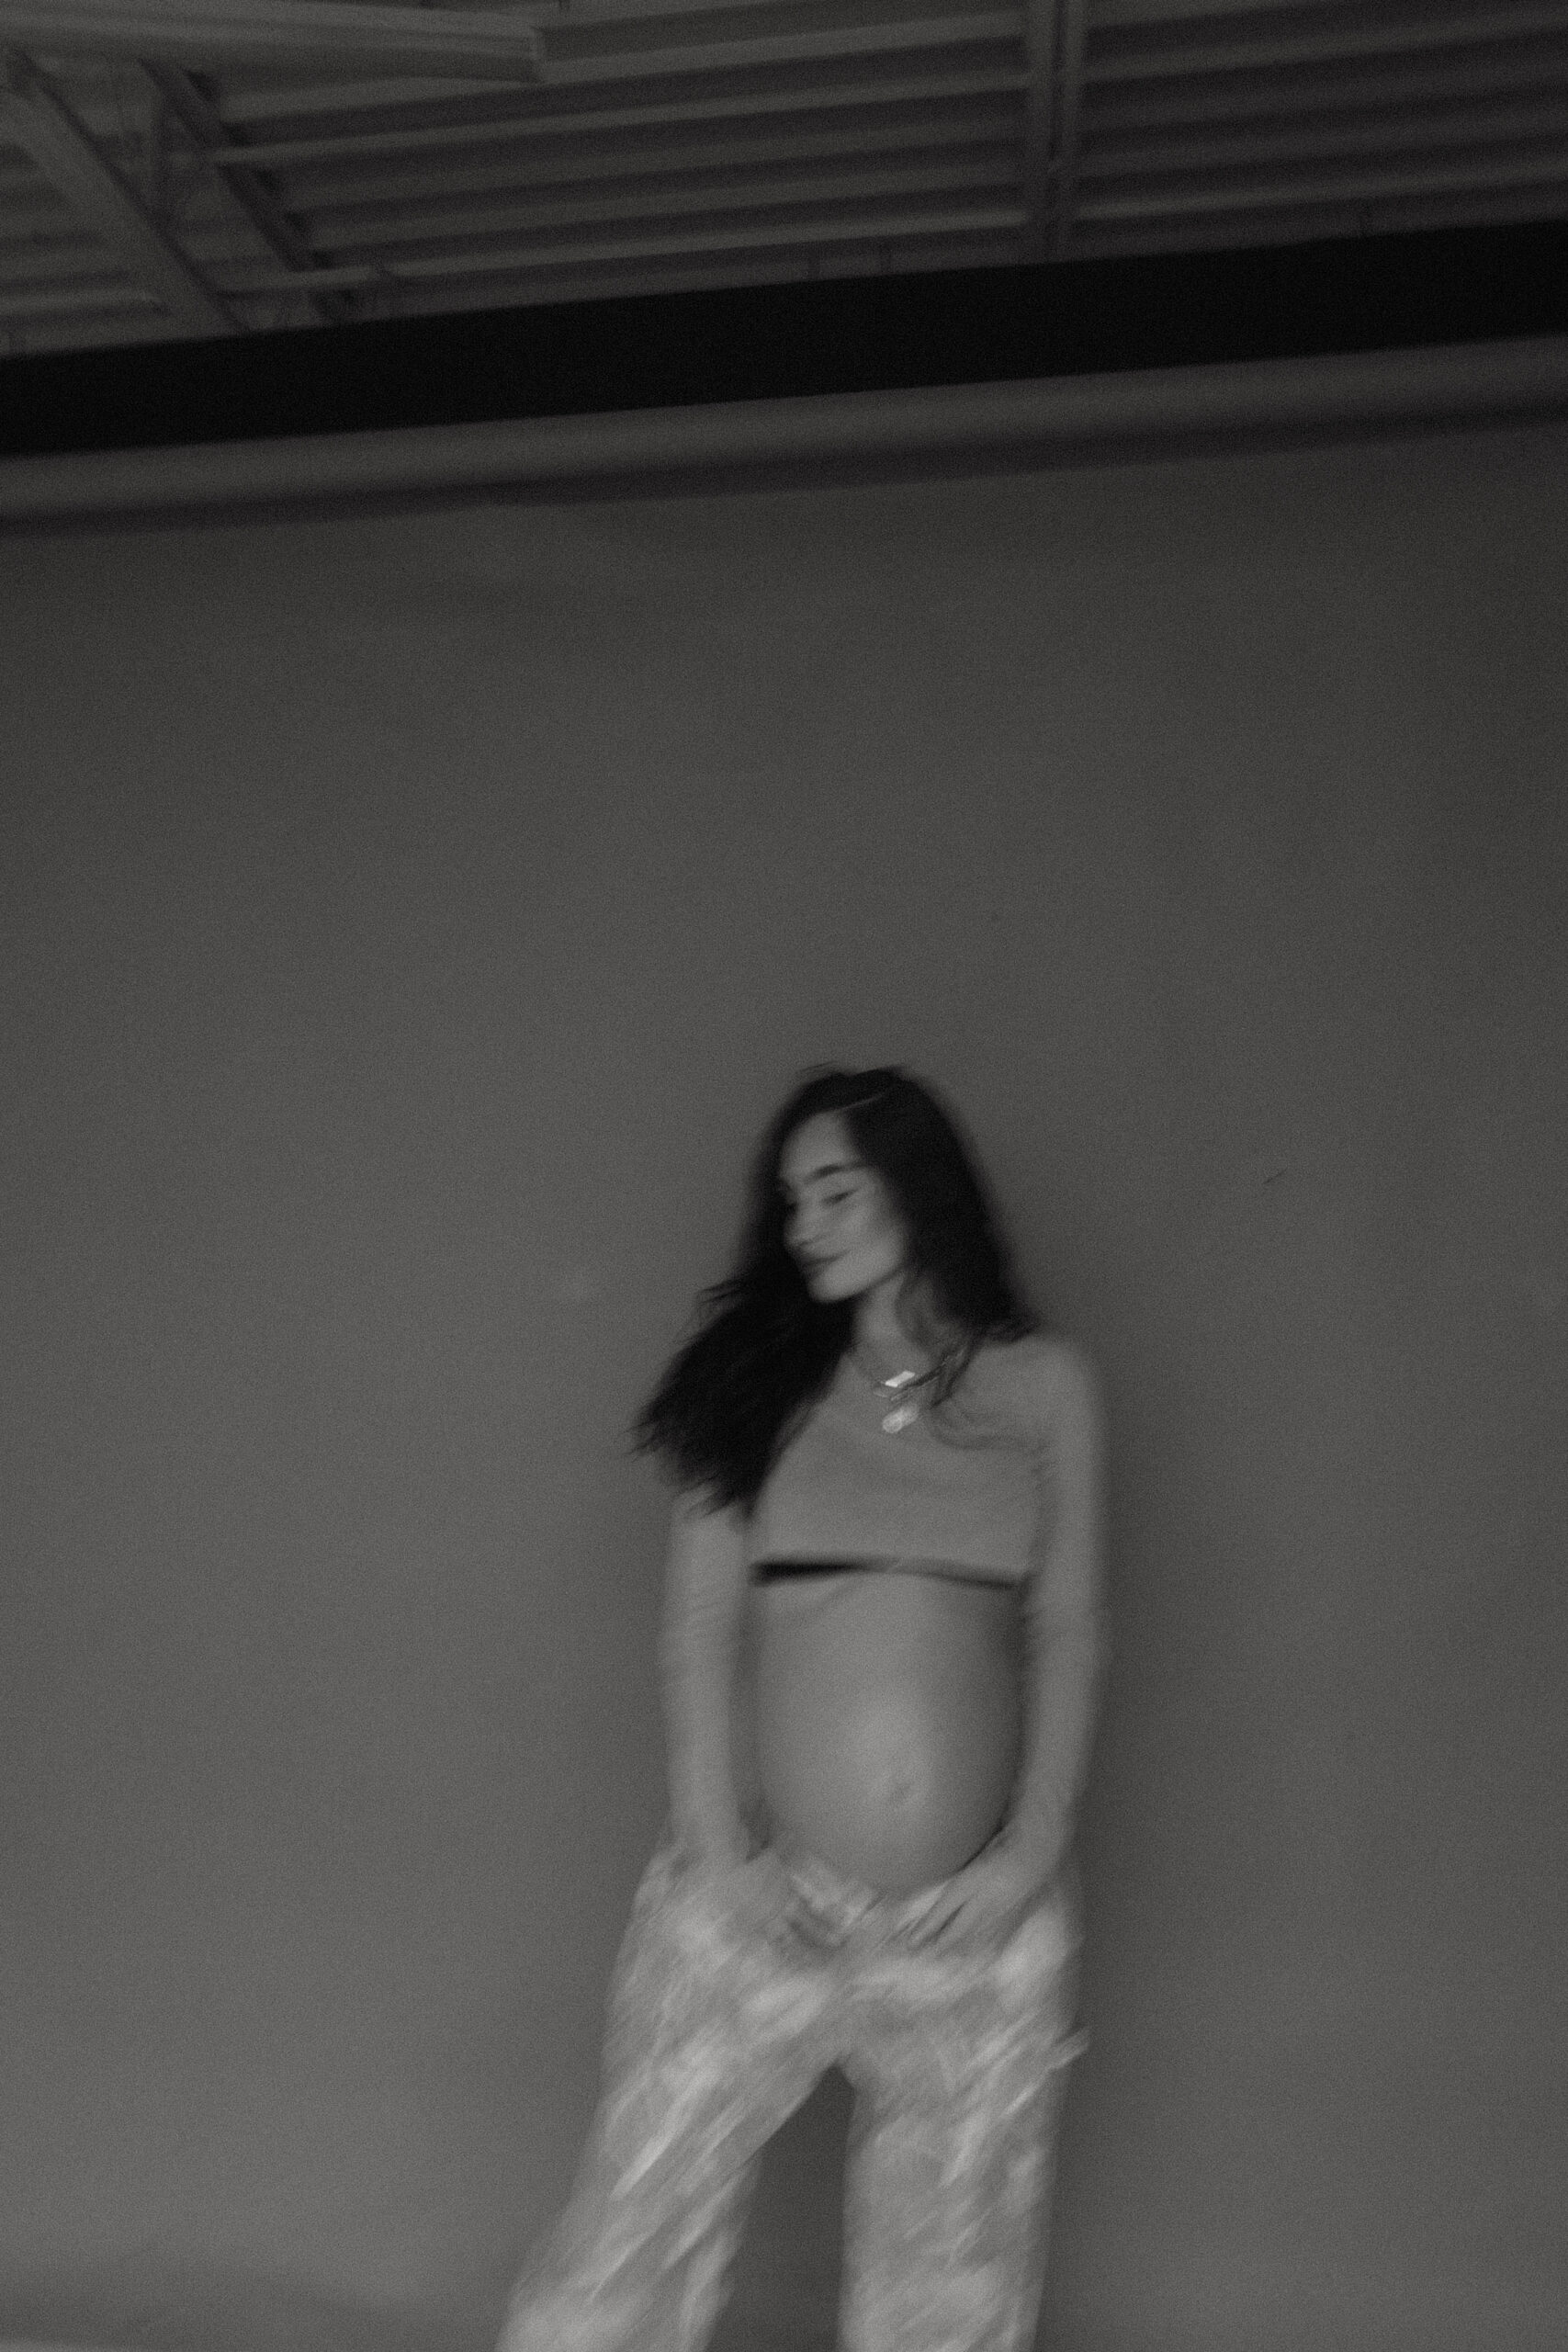 blurry image of a pregnant woman in studio